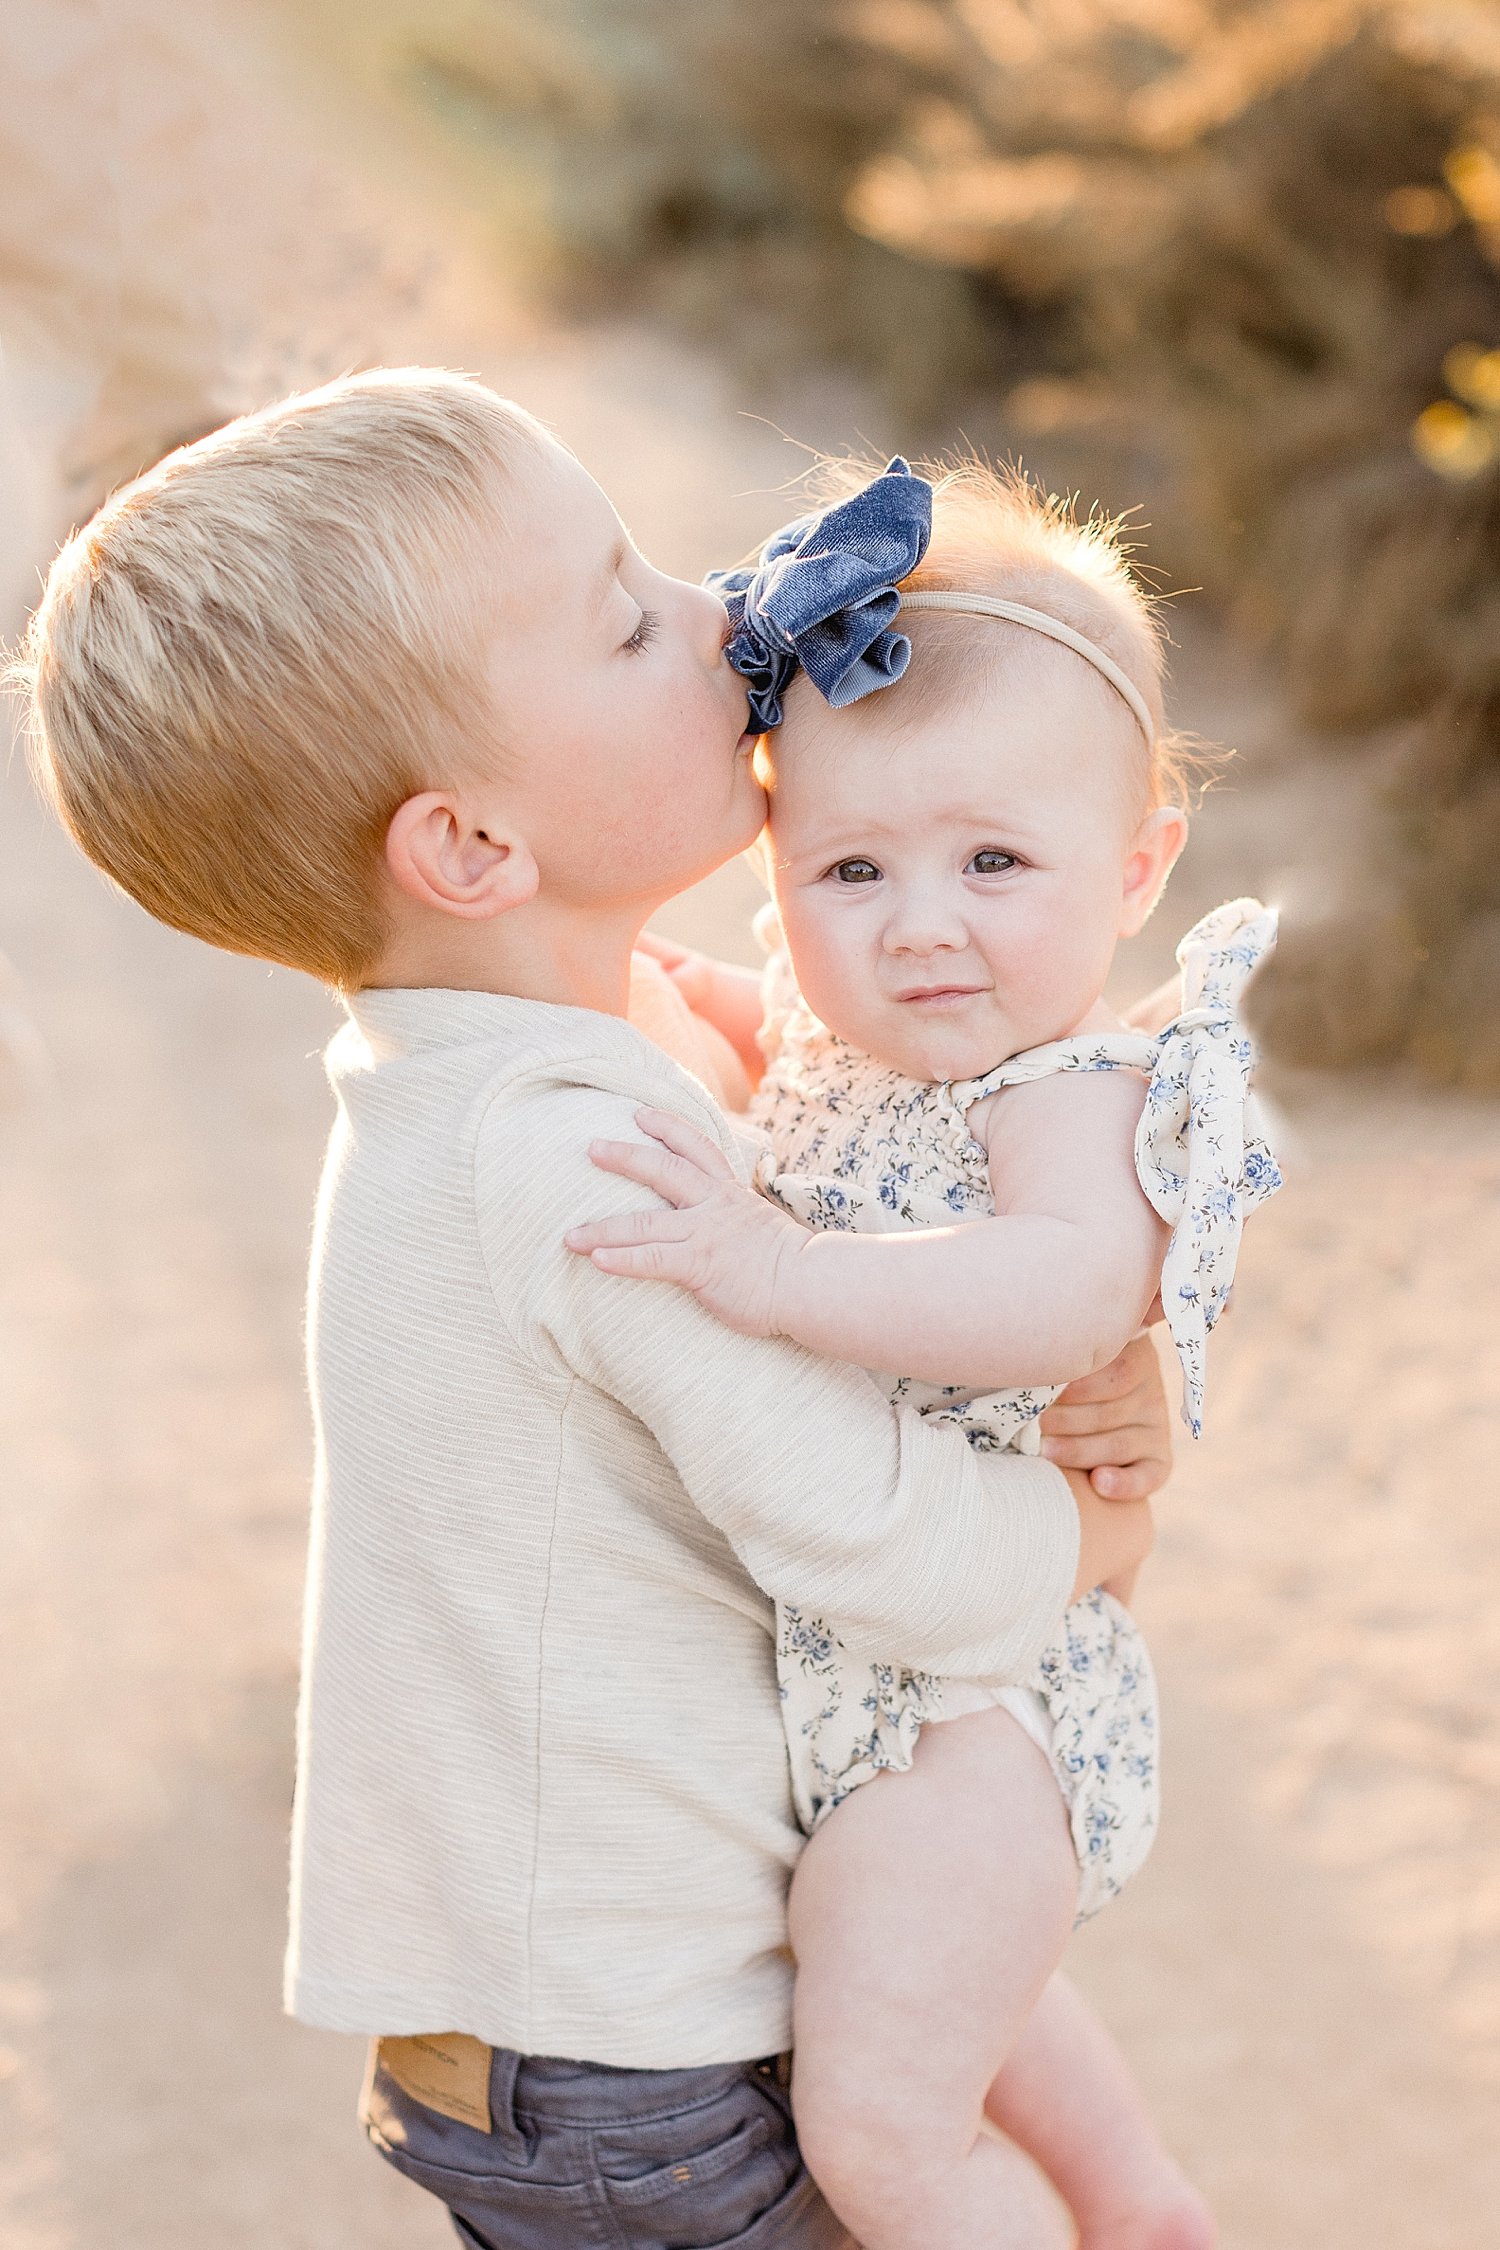 Brother and sister hugging | Ambre Williams Photography